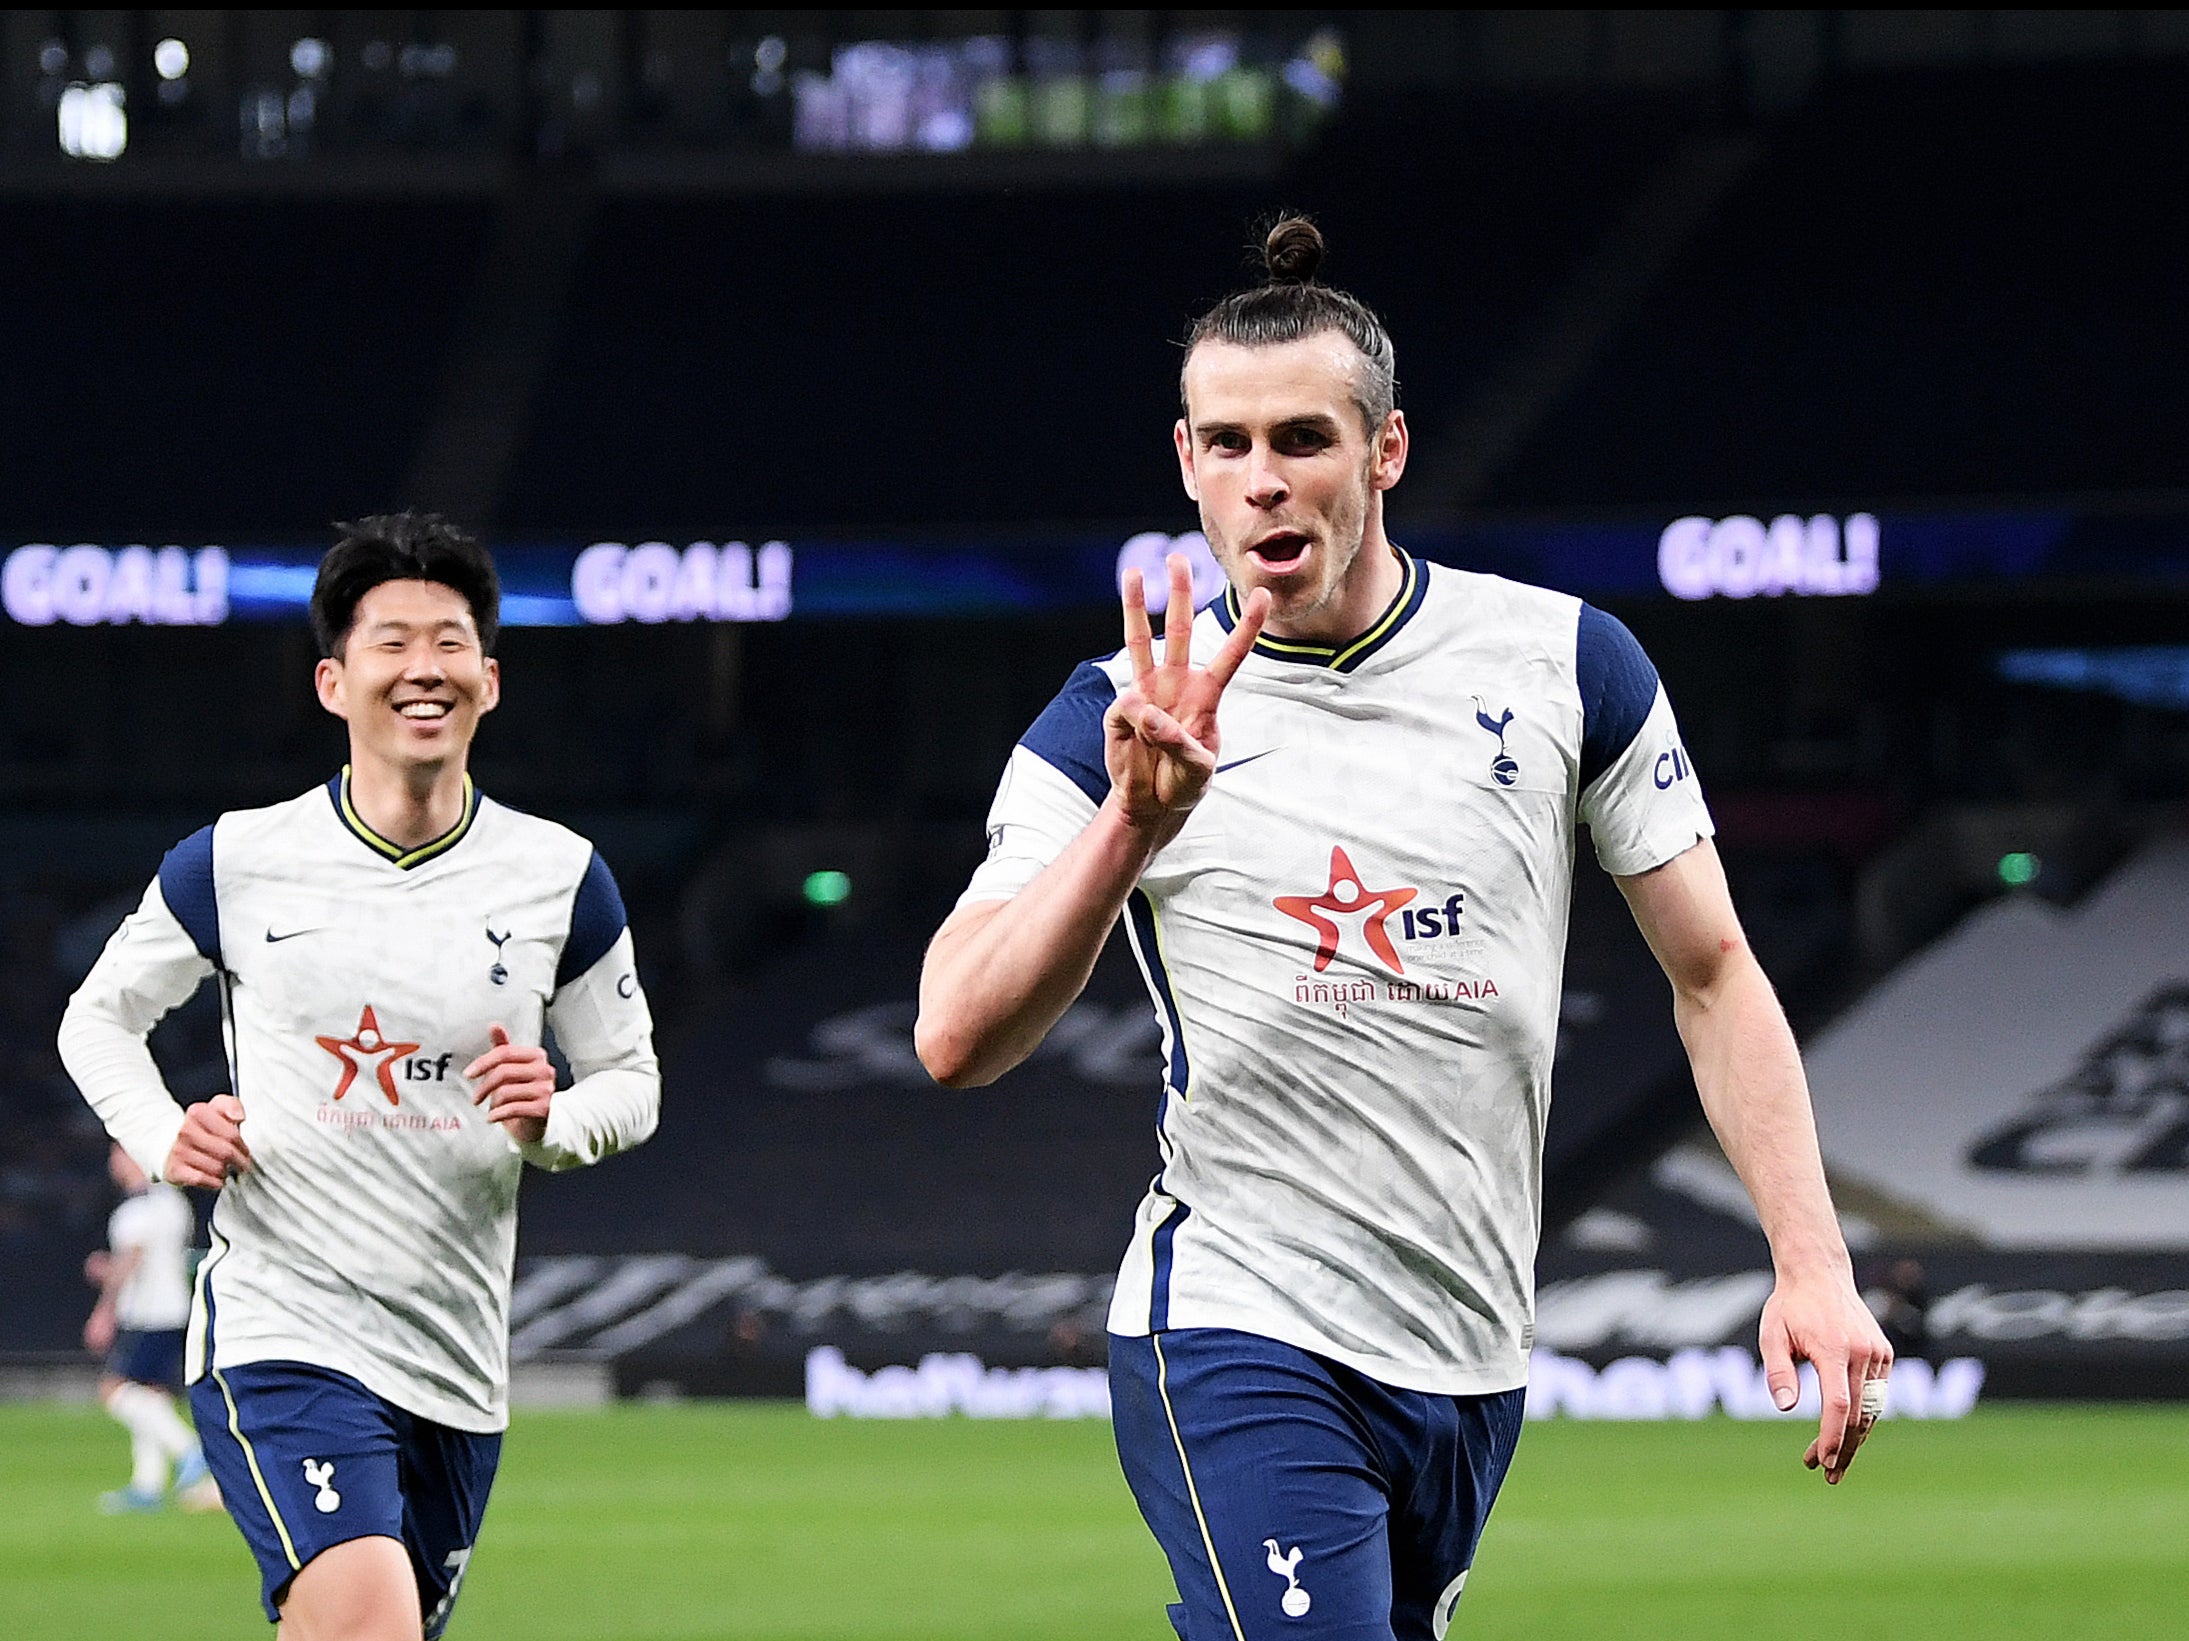 Gareth Bale (right) scored three times before Son Heung-min added Spurs’ fourth